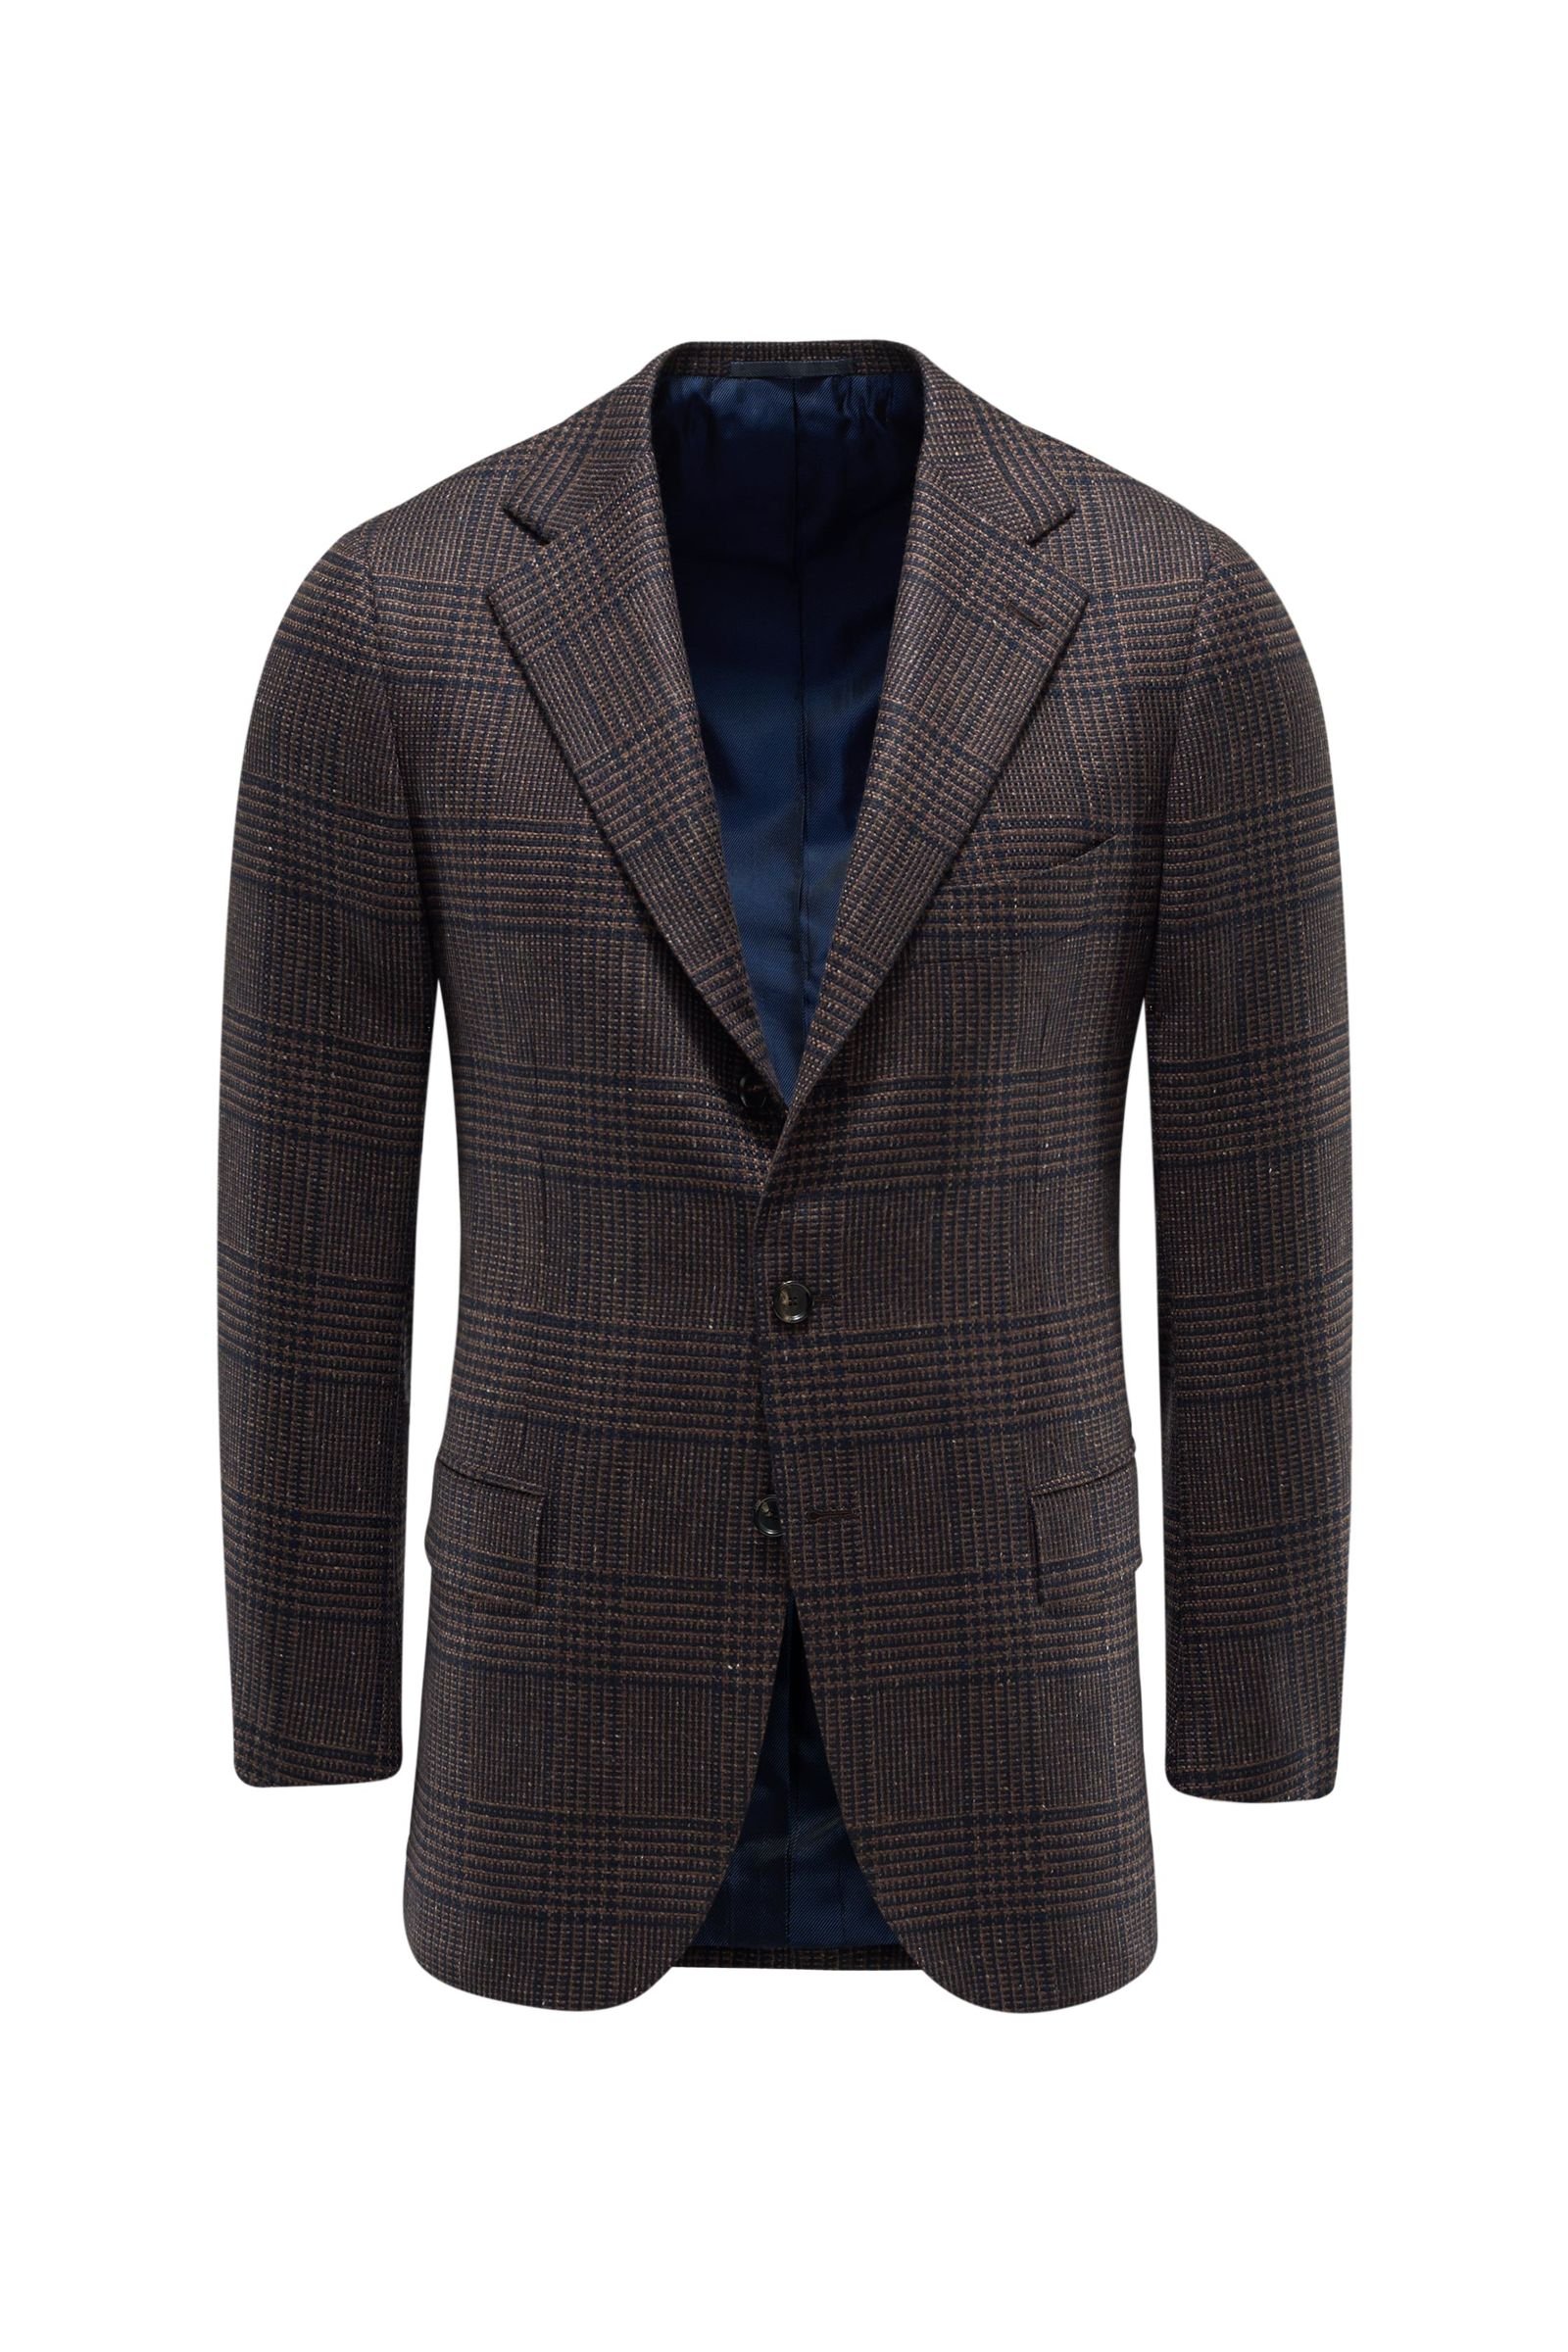 Cashmere smart-casual jacket brown/navy checked